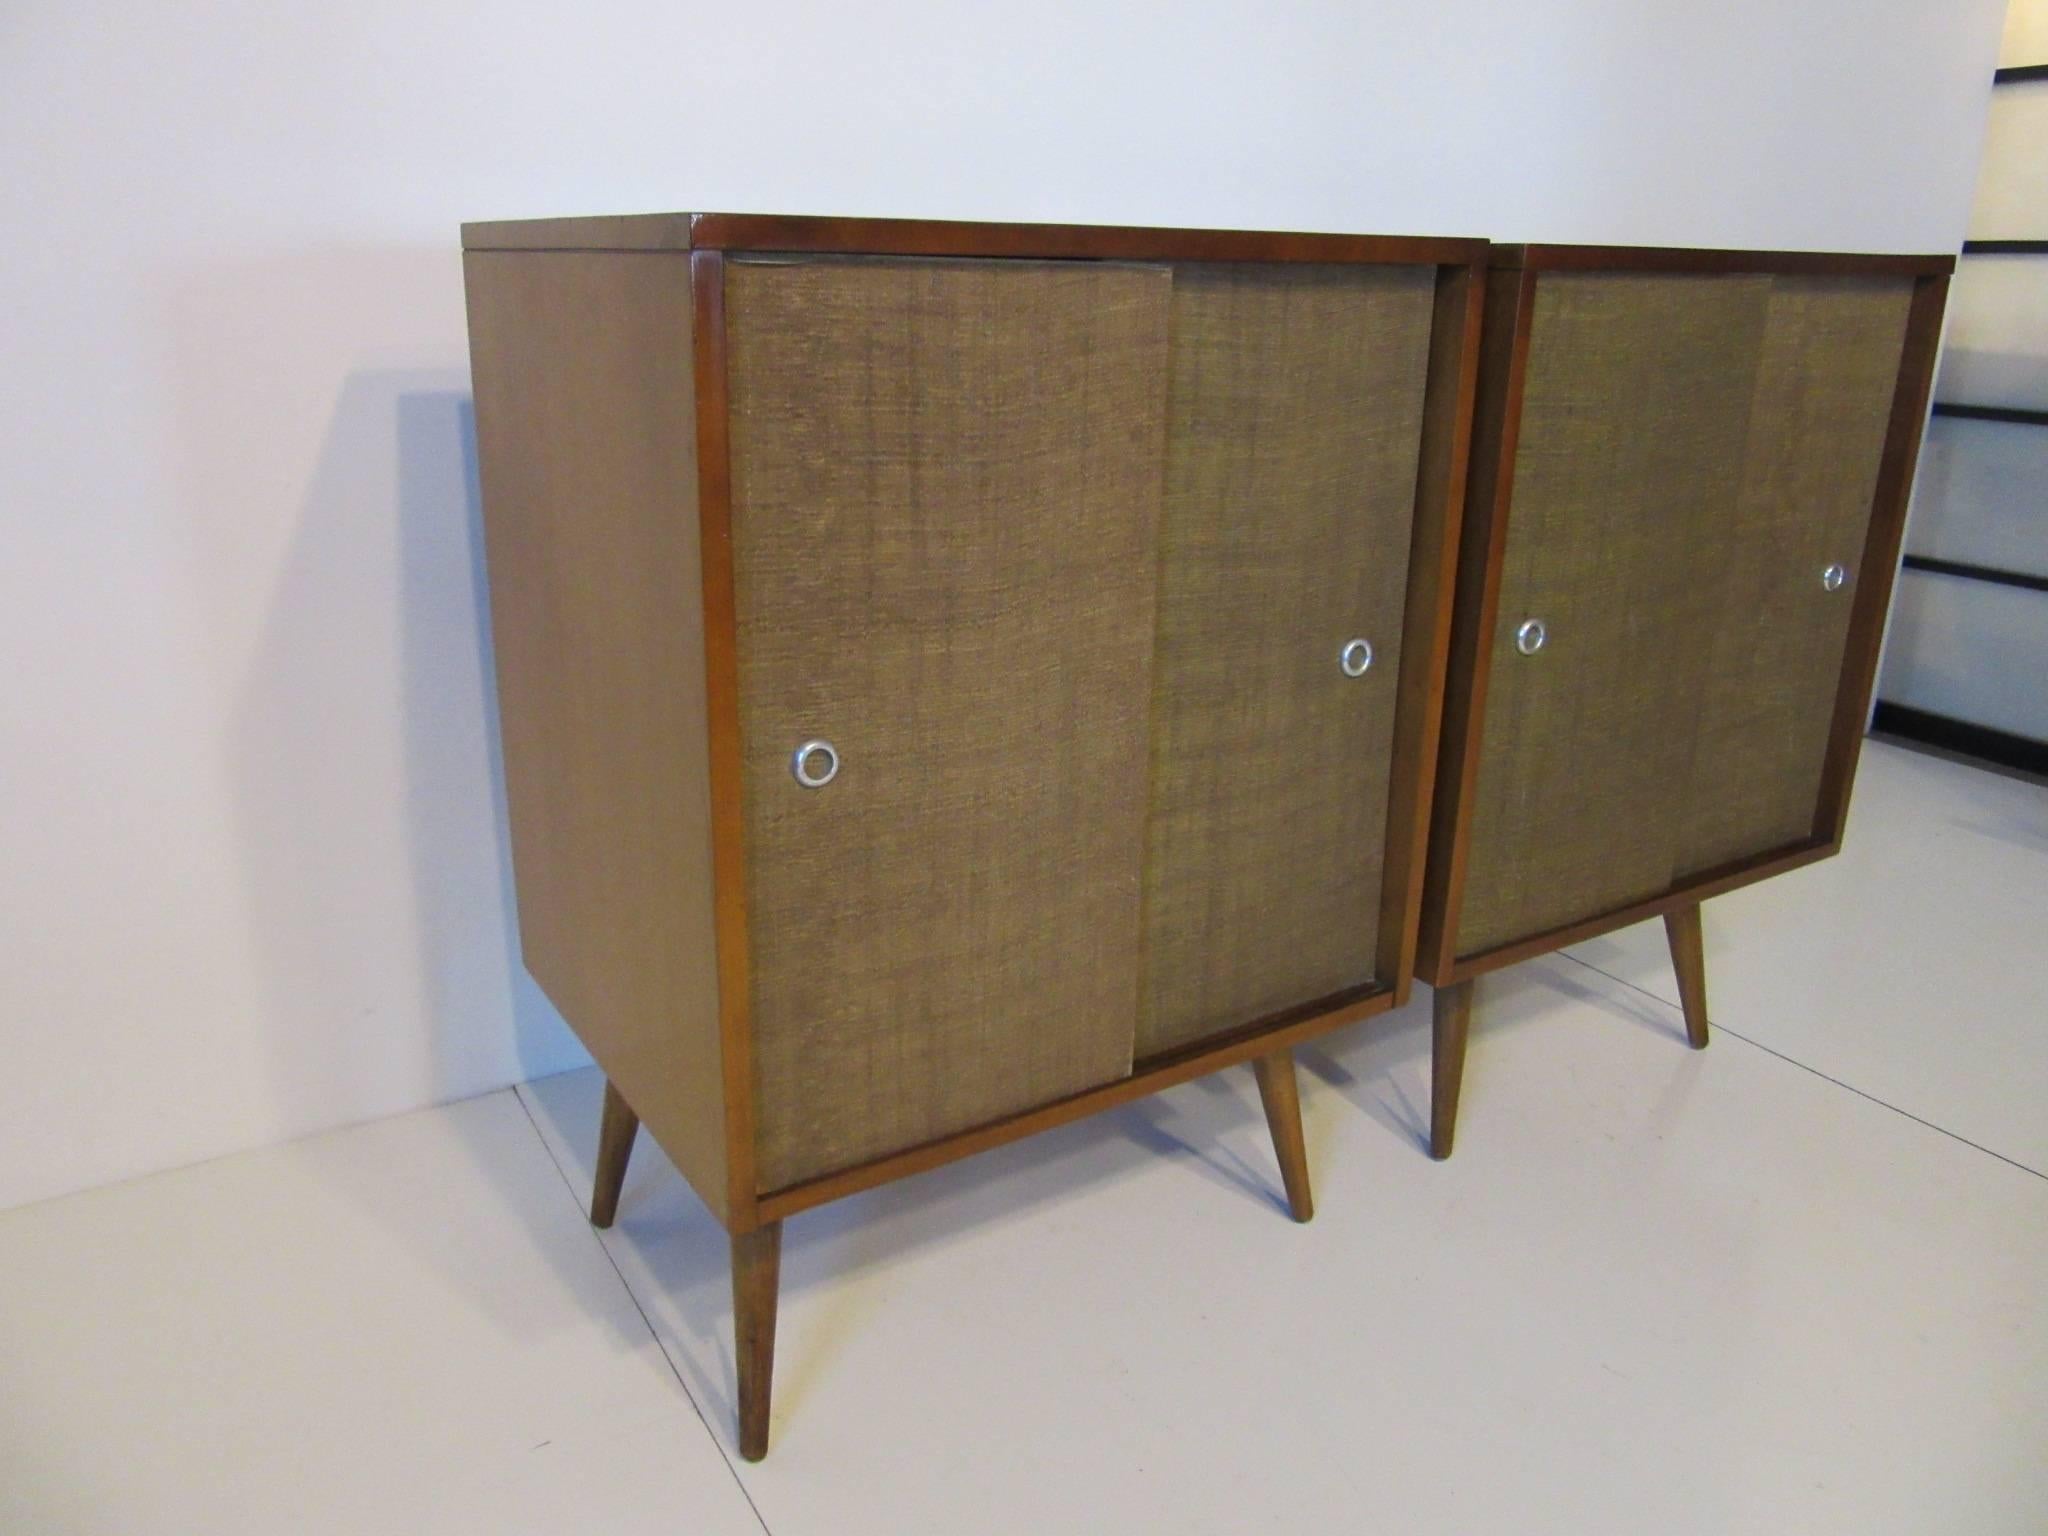 A pair of sliding grass cloth door smaller sized cabinets with fixed conical legs manufactured by the Winchendon Furniture Company for the Planner Group Collection.